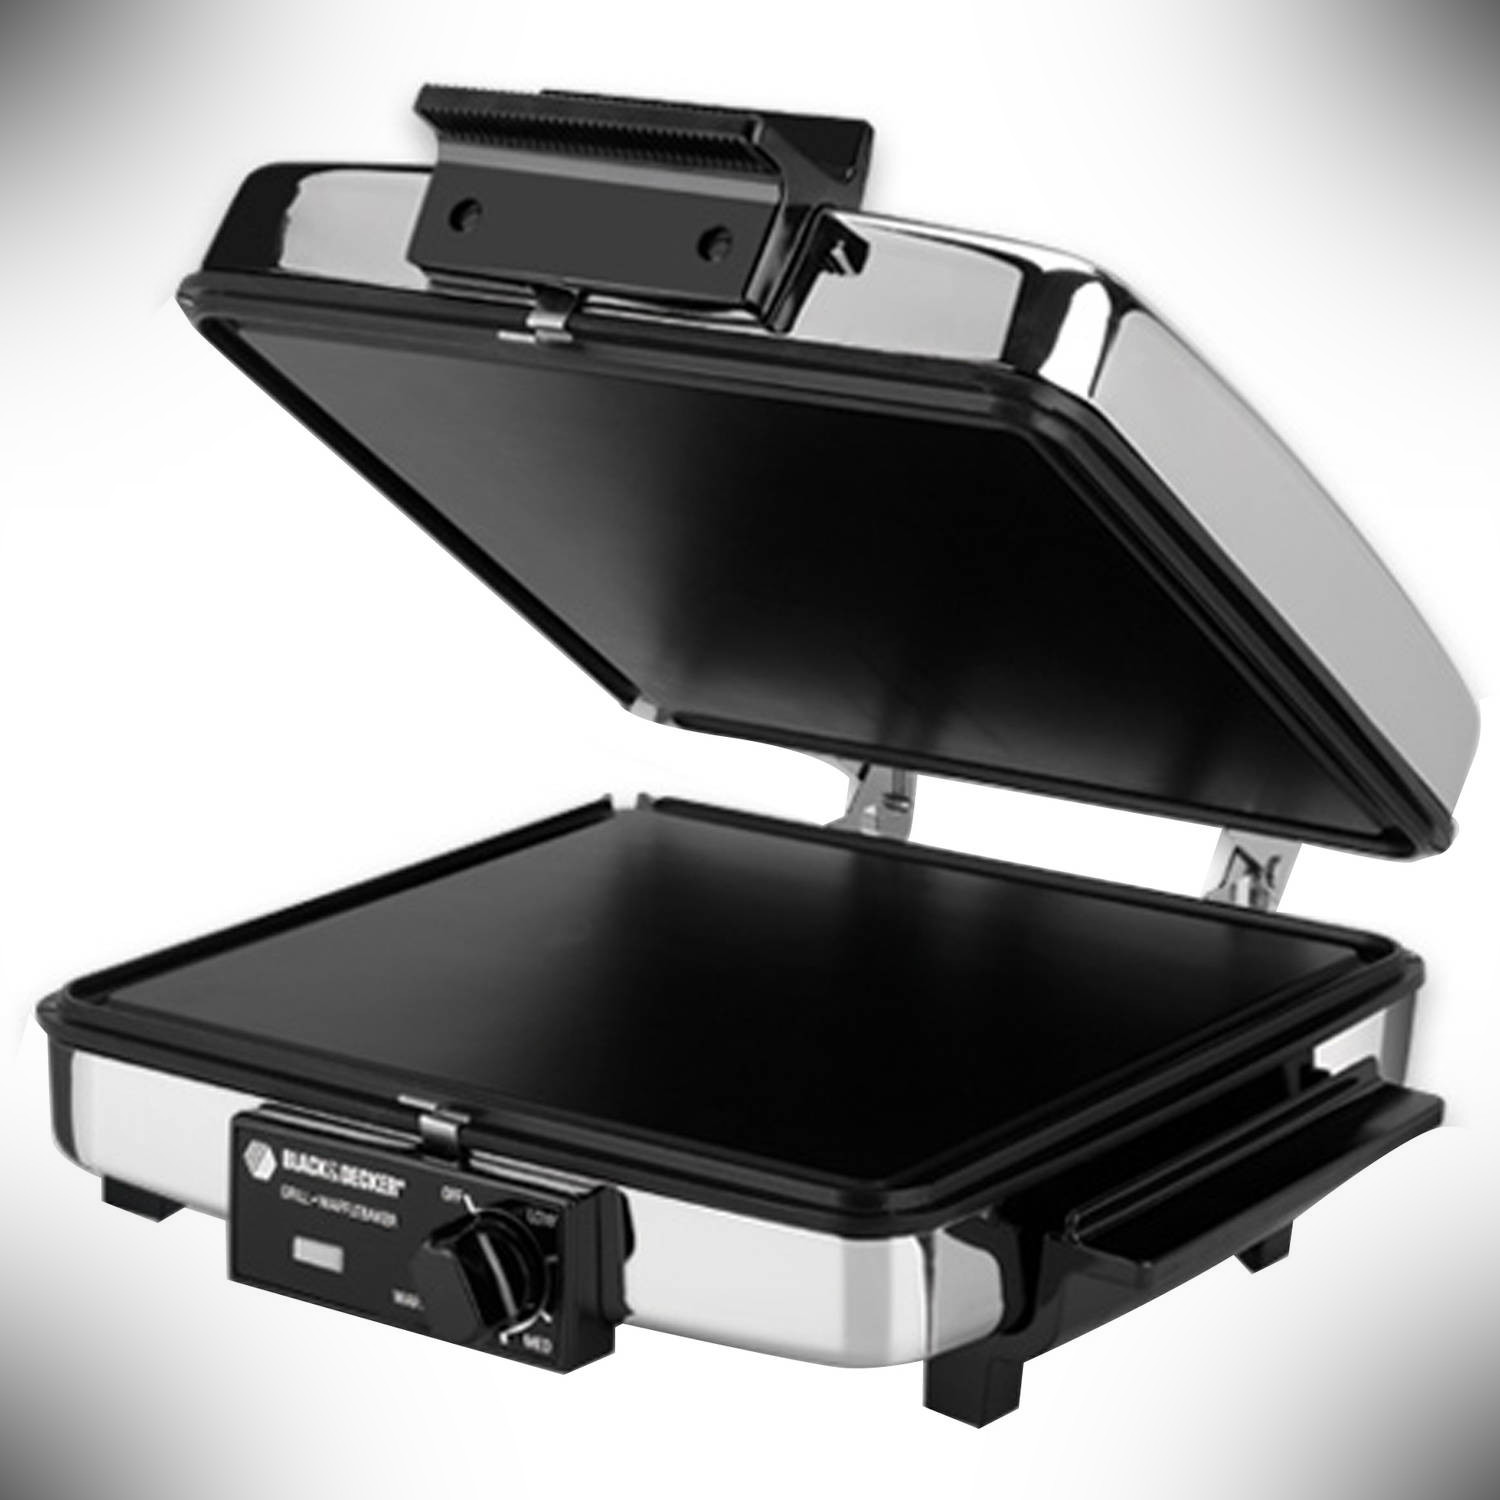 Black & Decker G48TD Grill and Waffle Baker